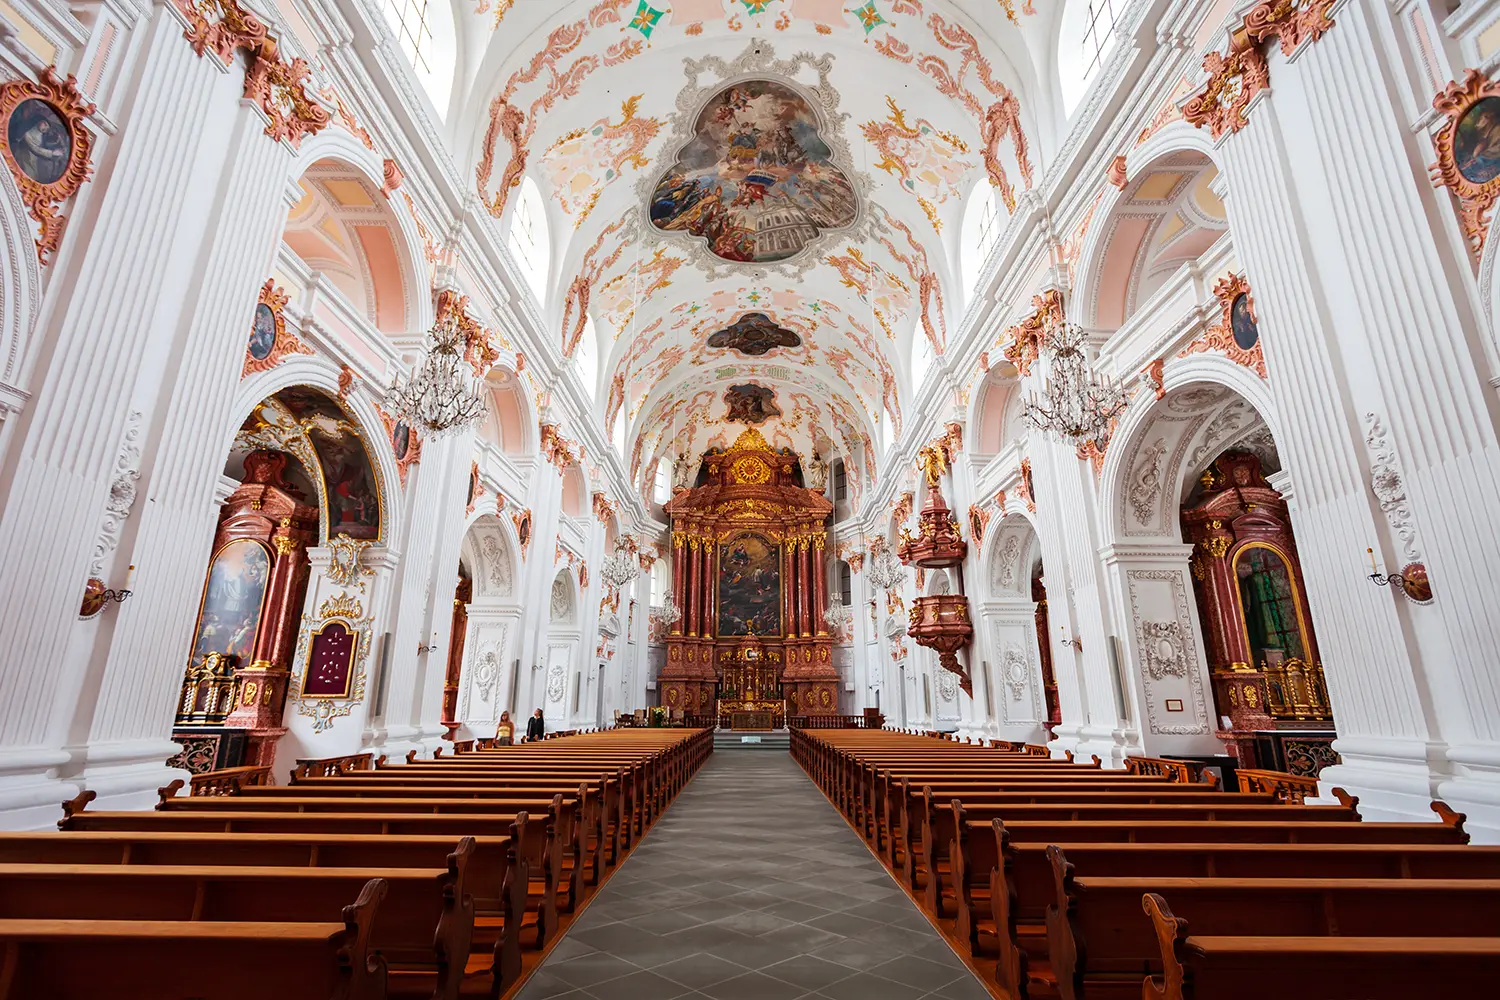 Jesuit Church or Jesuitenkirche St. Franz Xaver is a Catholic church located in Lucerne city, Switzerland